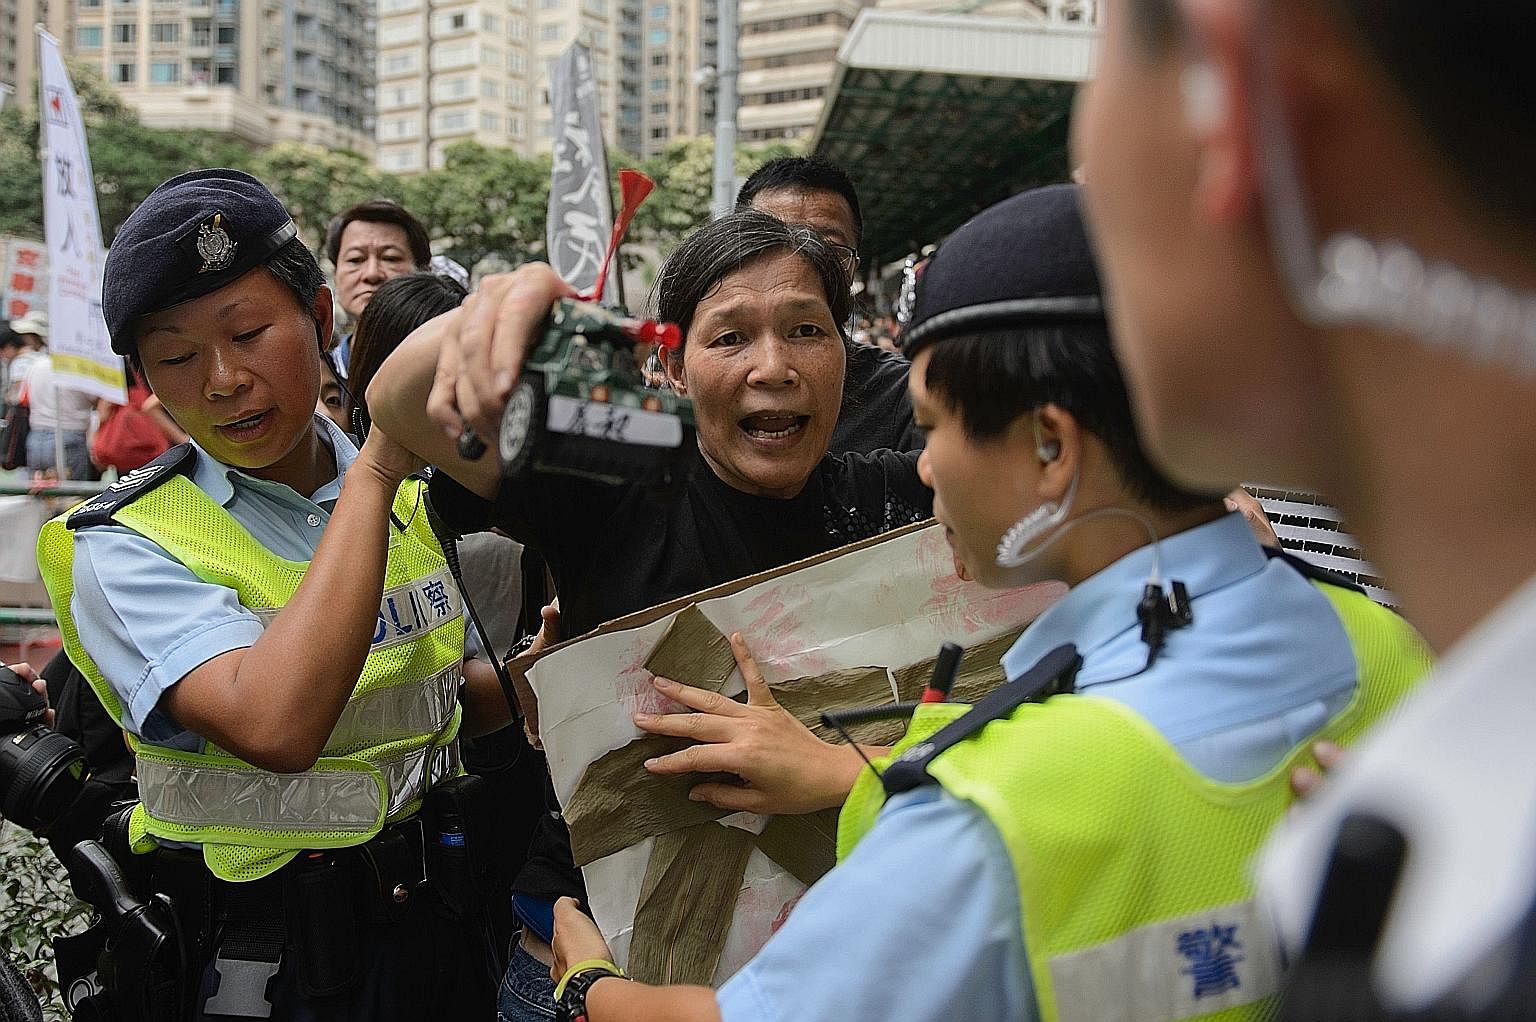 Police holding back a pro-democracy activist, with a toy tank in her hand, after she taunted pro-China demonstrators in Hong Kong on Sunday. The pro-China demonstrators had gathered to counter-protest against a pro-democracy rally ahead of the annive